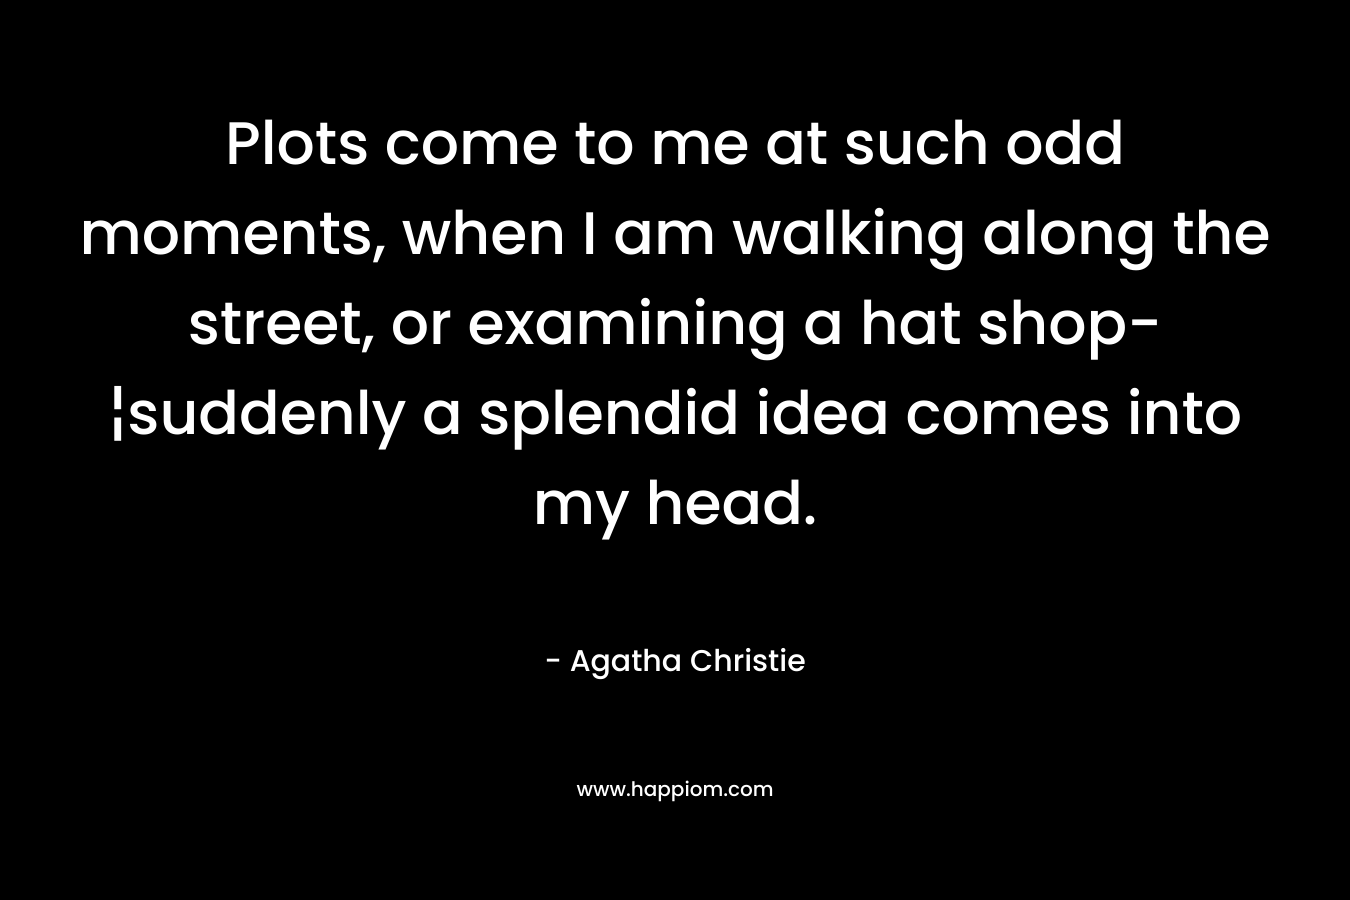 Plots come to me at such odd moments, when I am walking along the street, or examining a hat shop-¦suddenly a splendid idea comes into my head.